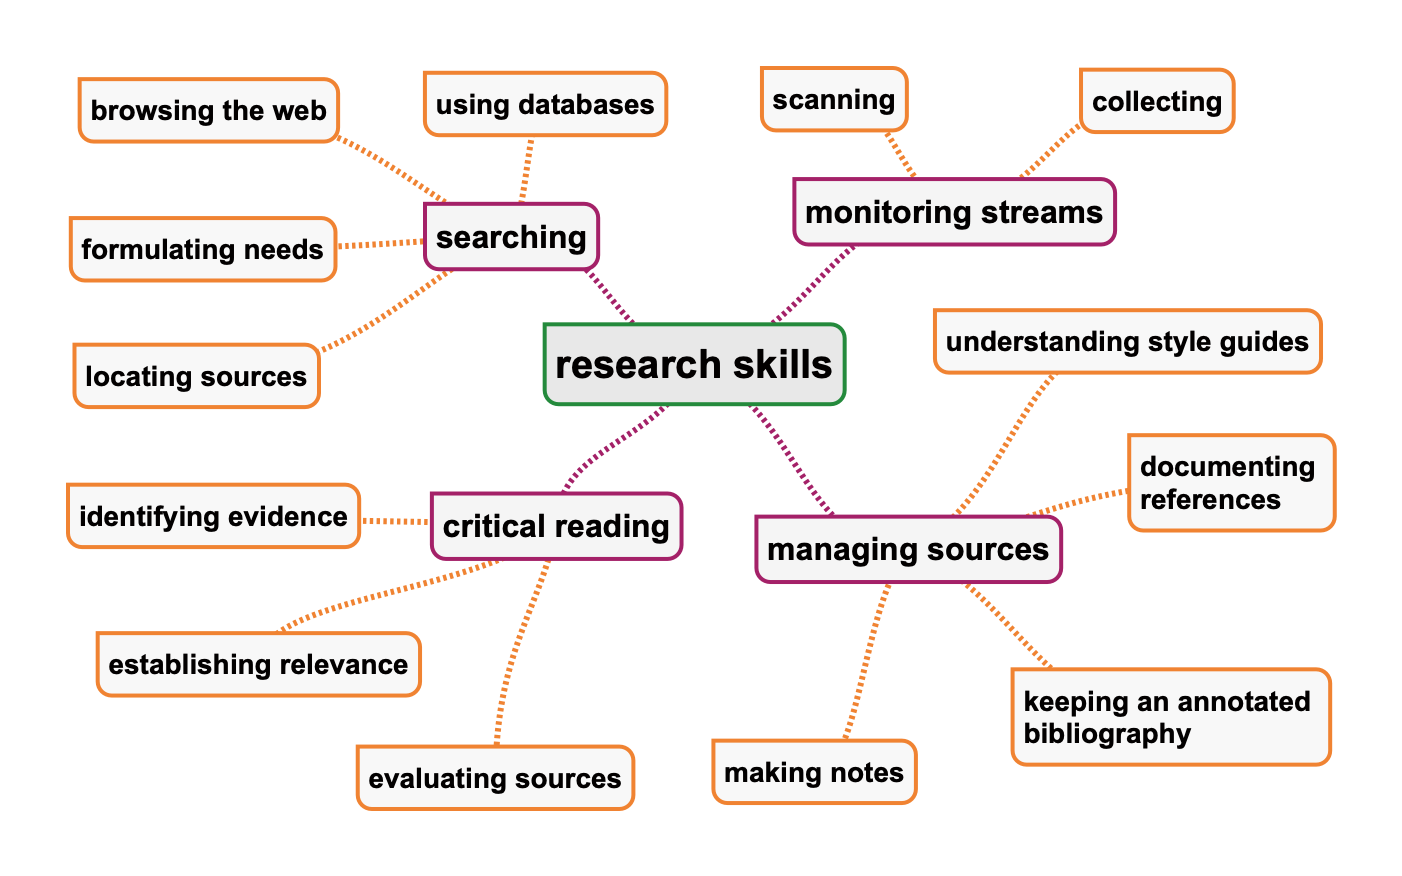 skills required for research